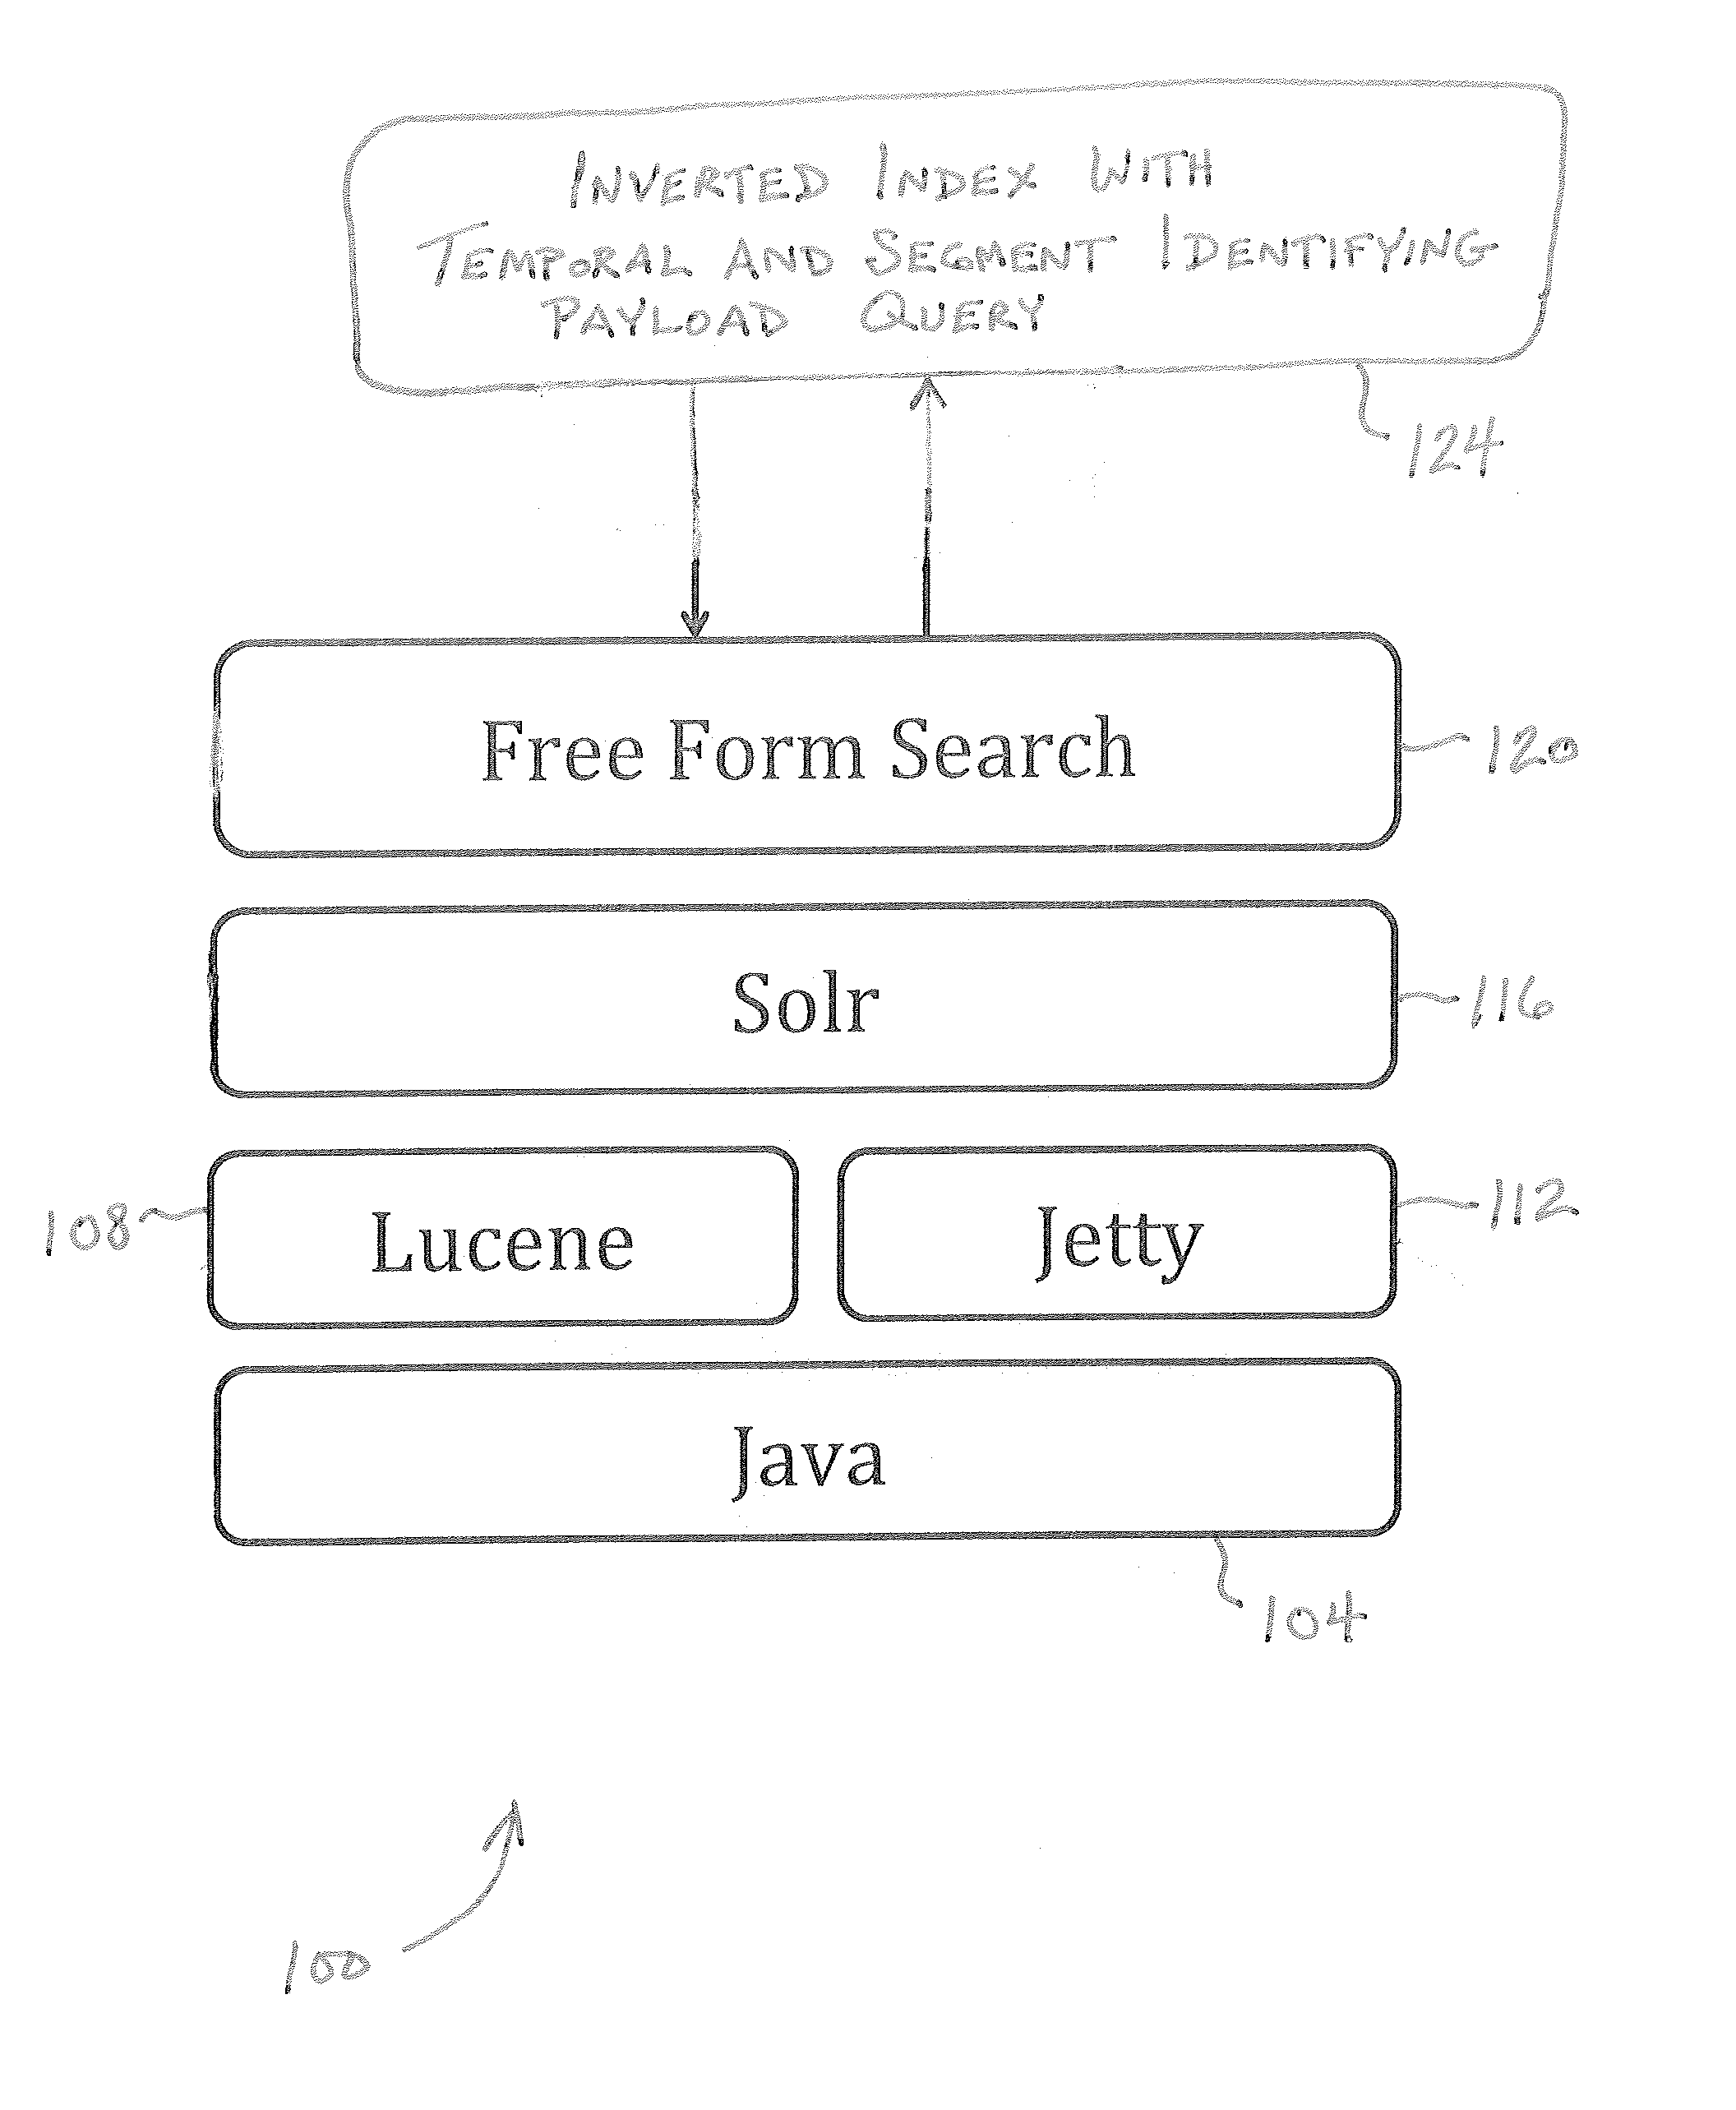 Multimedia metadata analysis using inverted index with temporal and segment identifying payloads